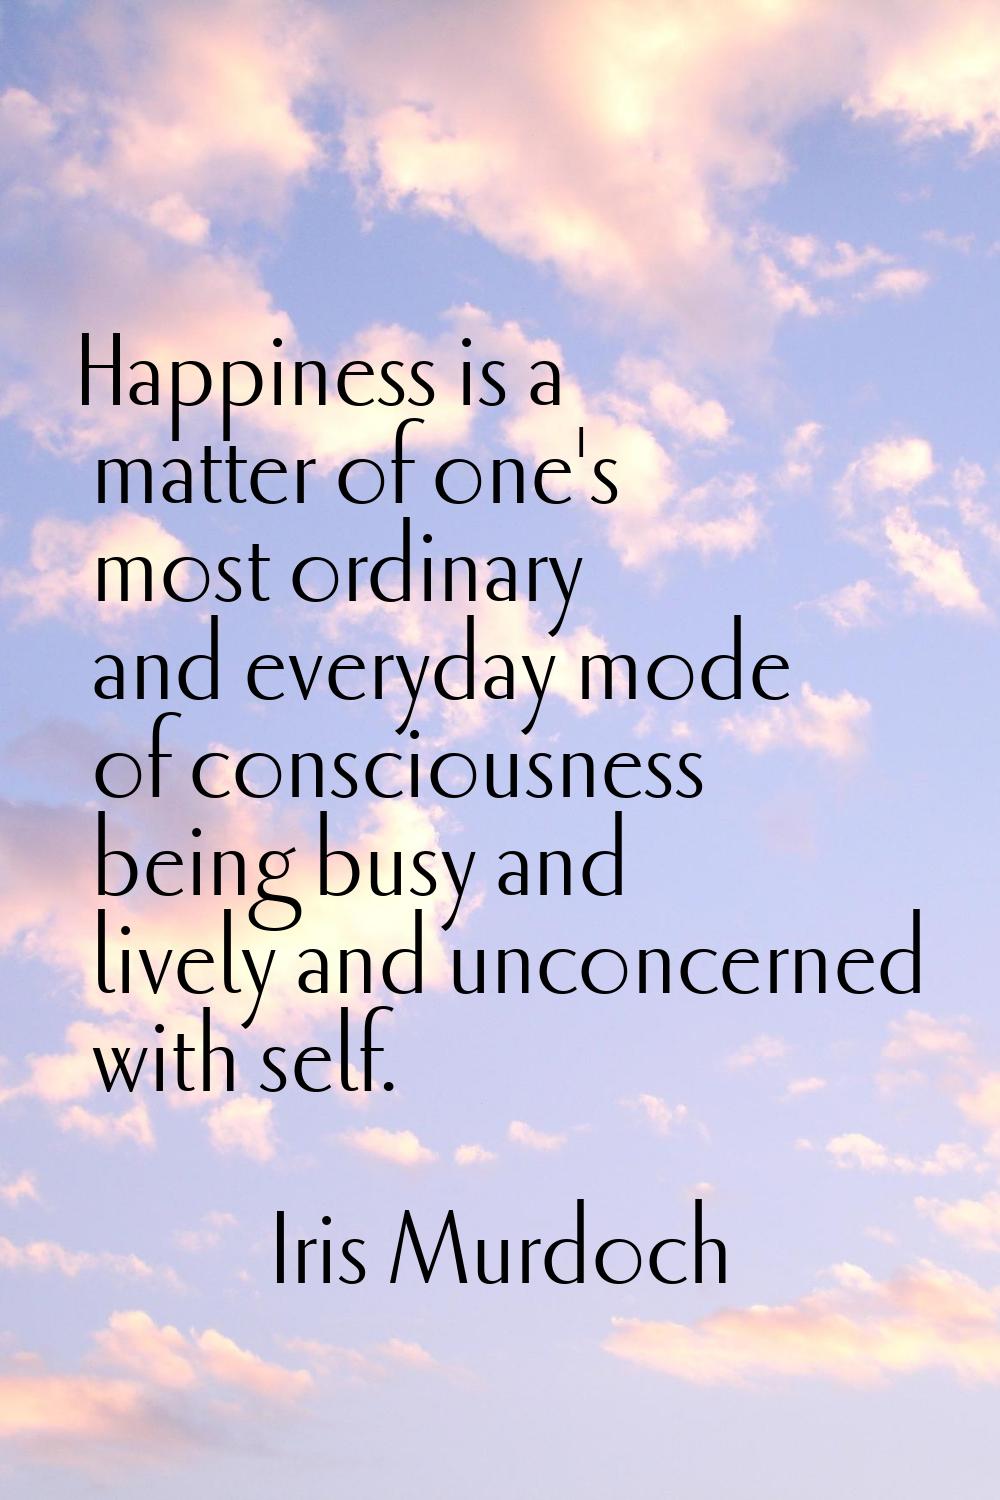 Happiness is a matter of one's most ordinary and everyday mode of consciousness being busy and live